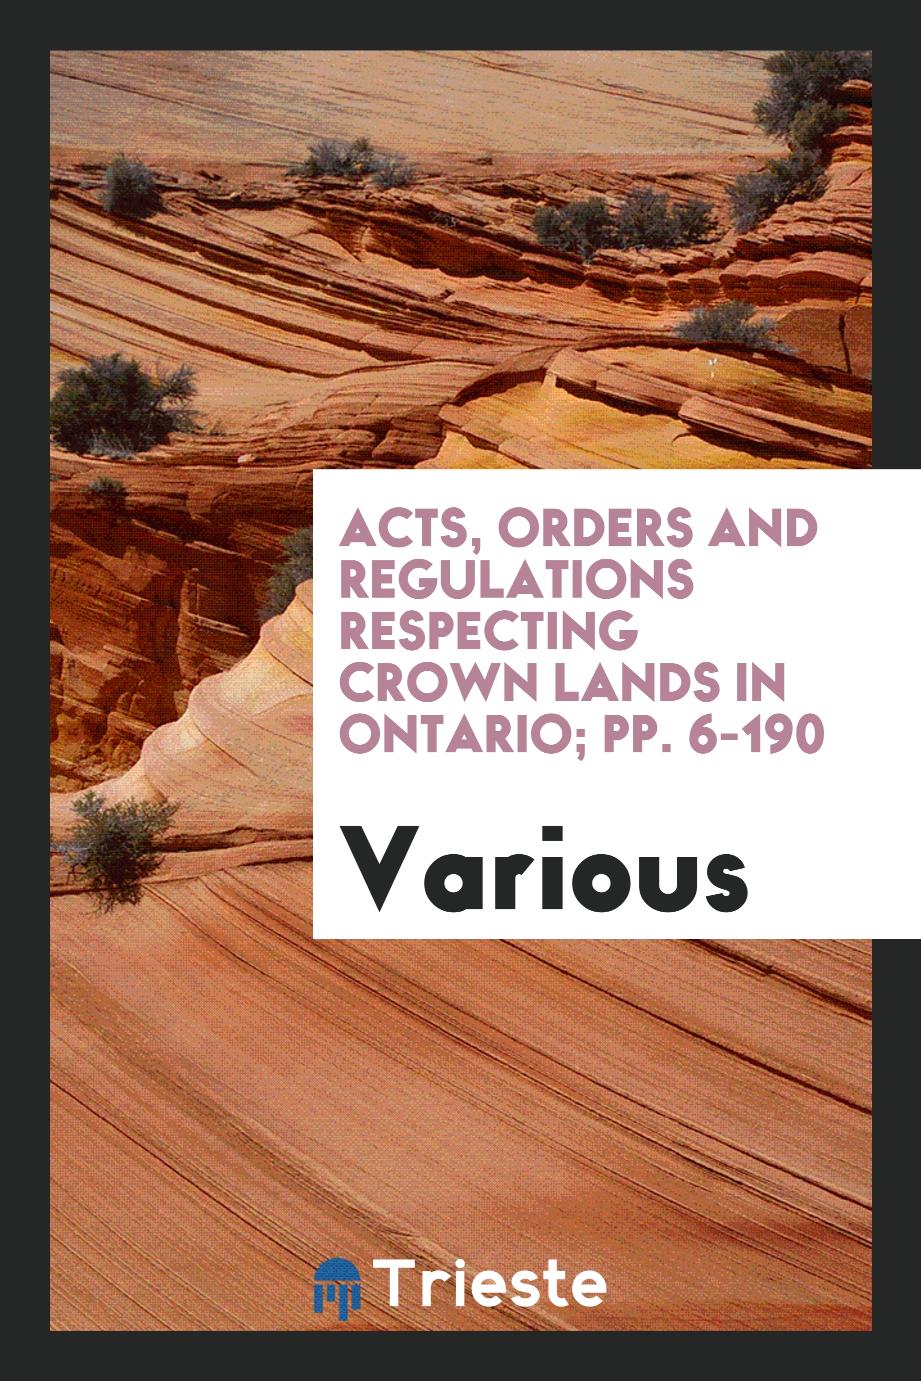 Acts, Orders and Regulations Respecting Crown Lands in Ontario; pp. 6-190